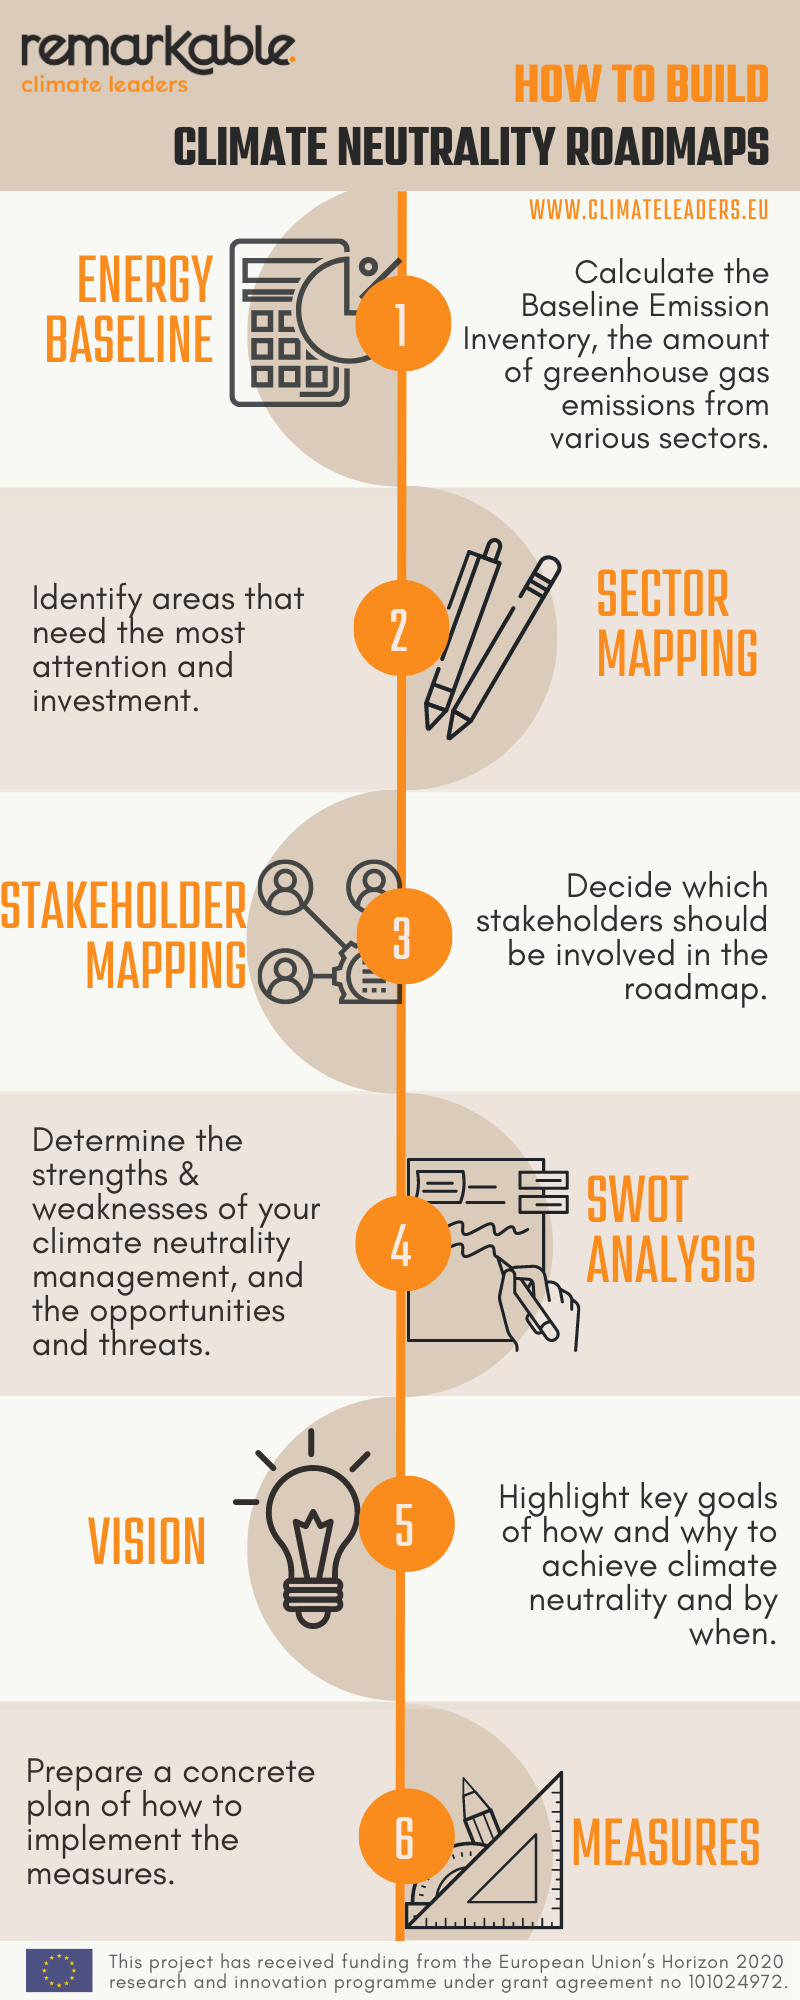 [Infographic] How to build Climate Neutrality Roadmaps